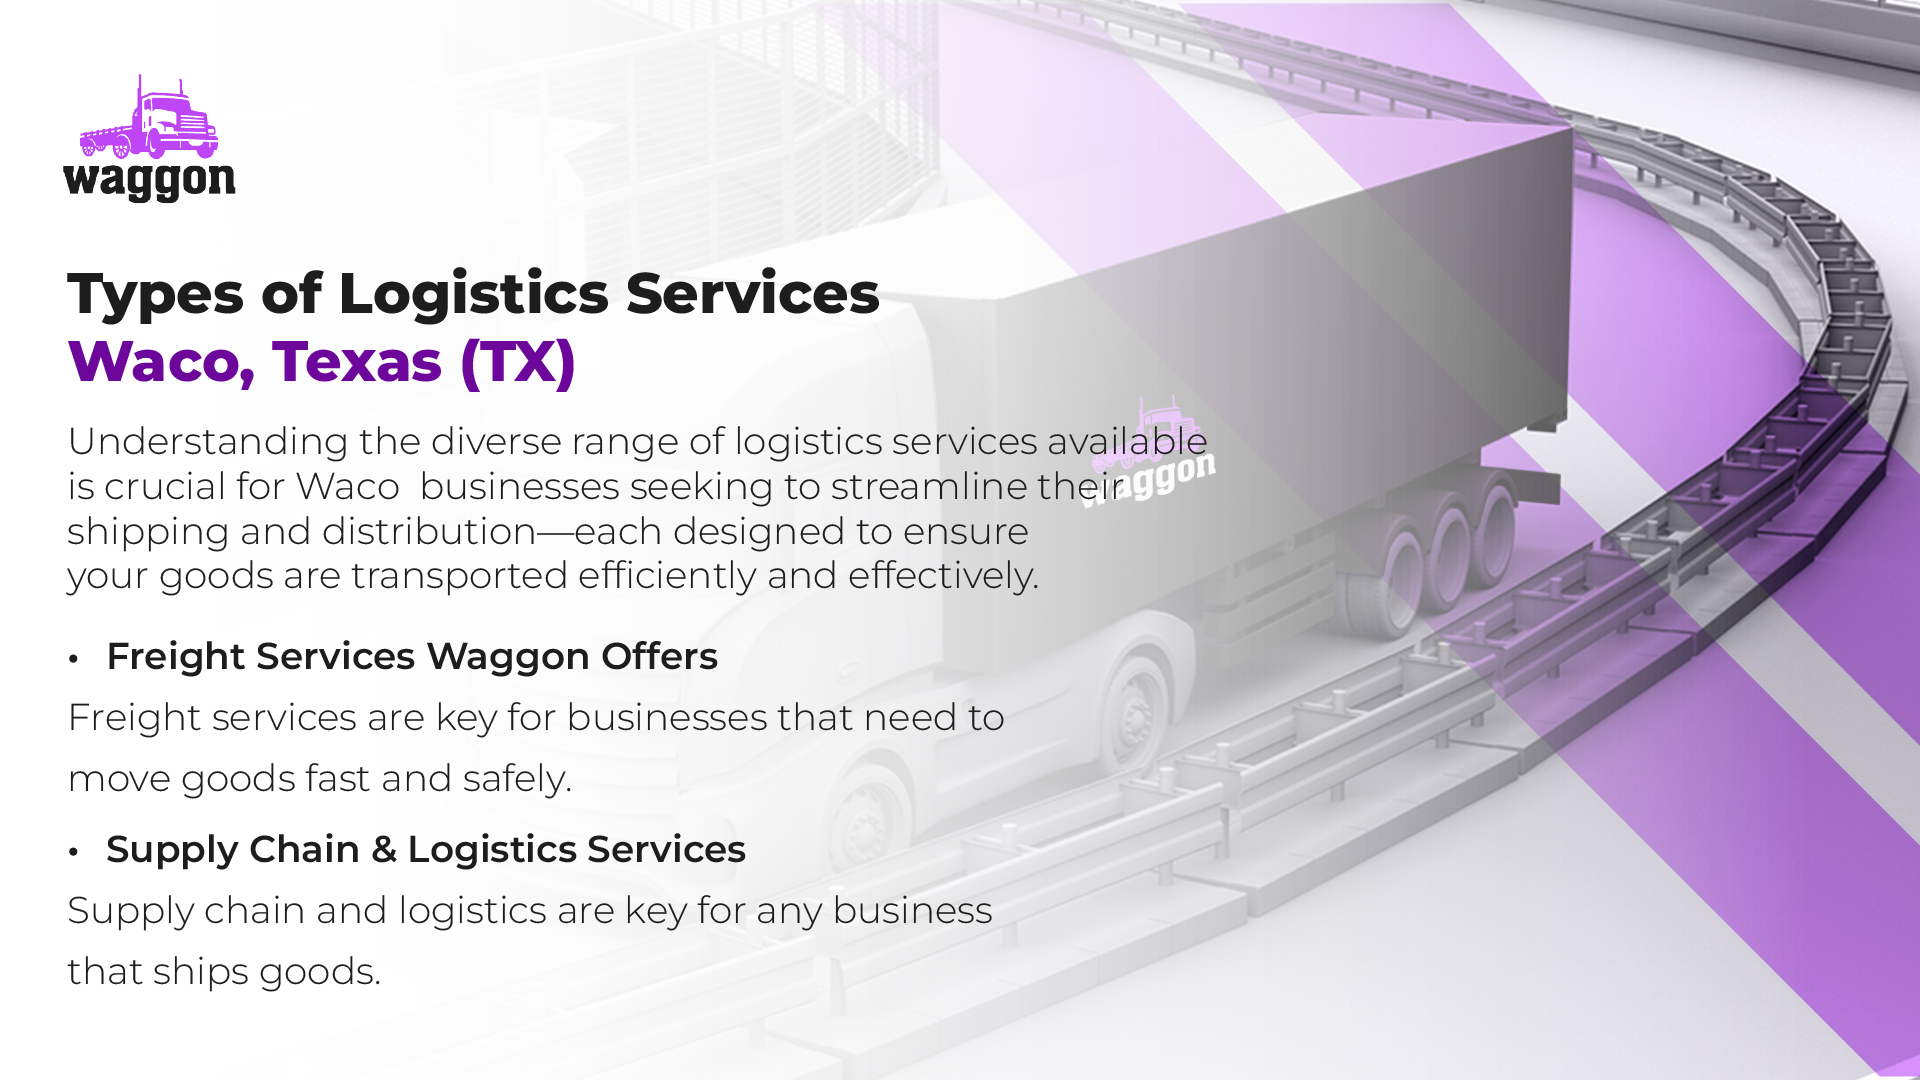 Types of Logistics Services in Waco, Texas (TX)